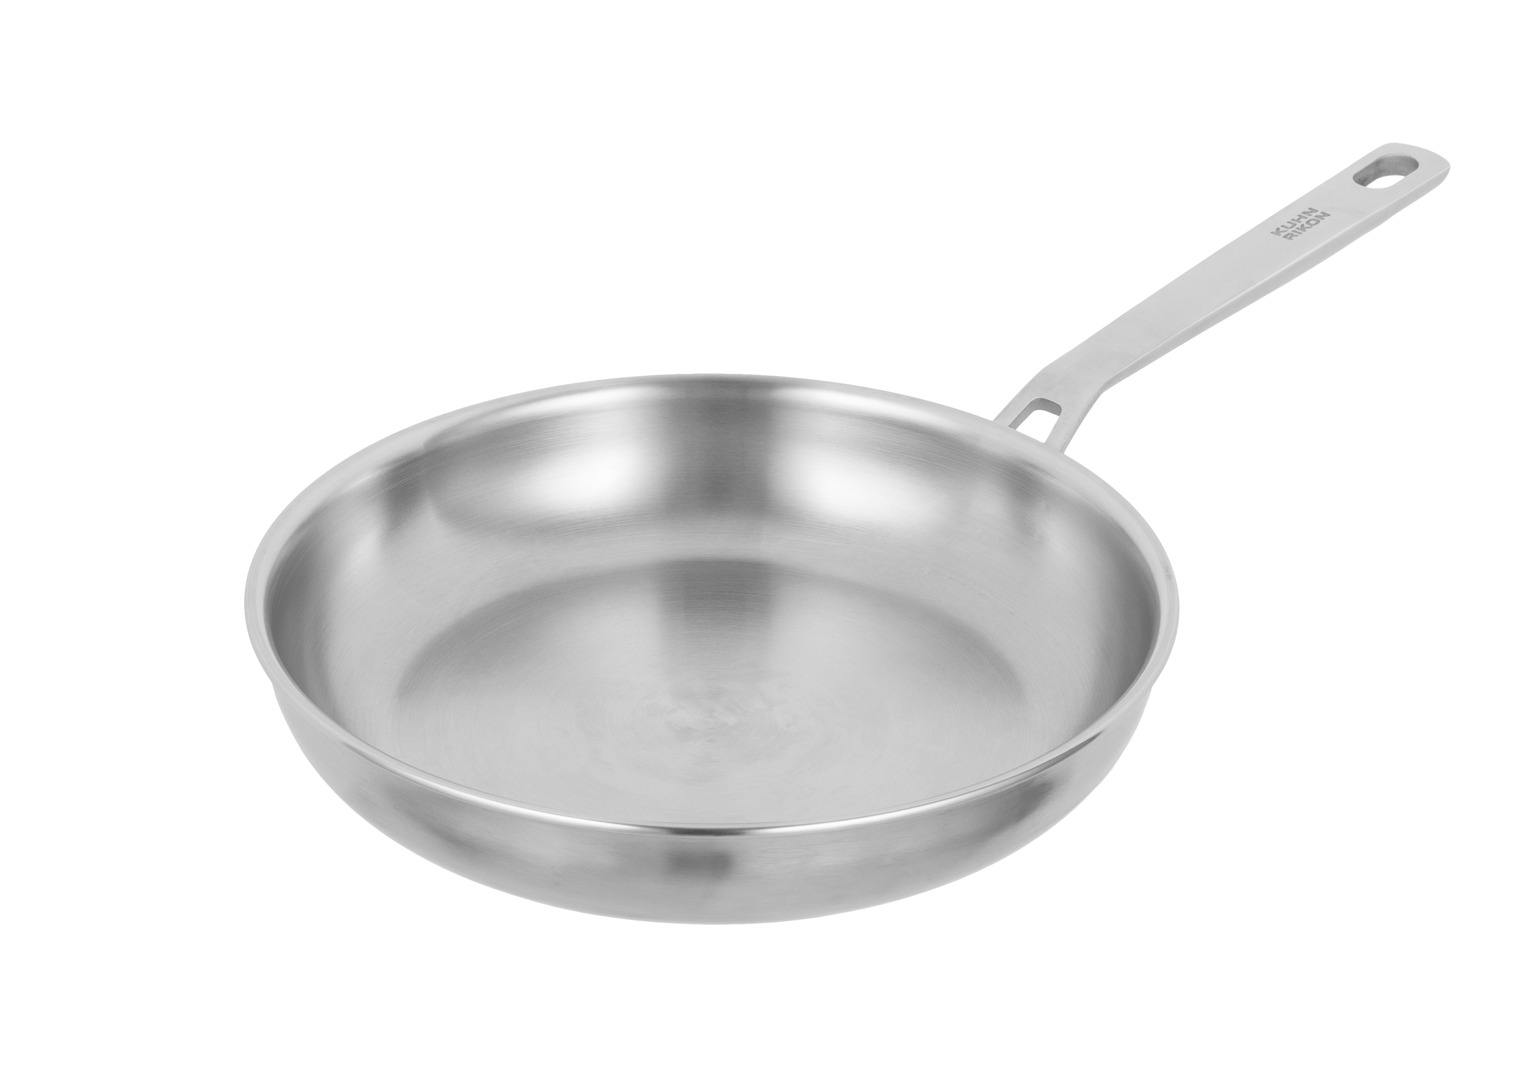 Kuhn Rikon - CULINARY FIVEPLY Frying pan uncoated 28 cm